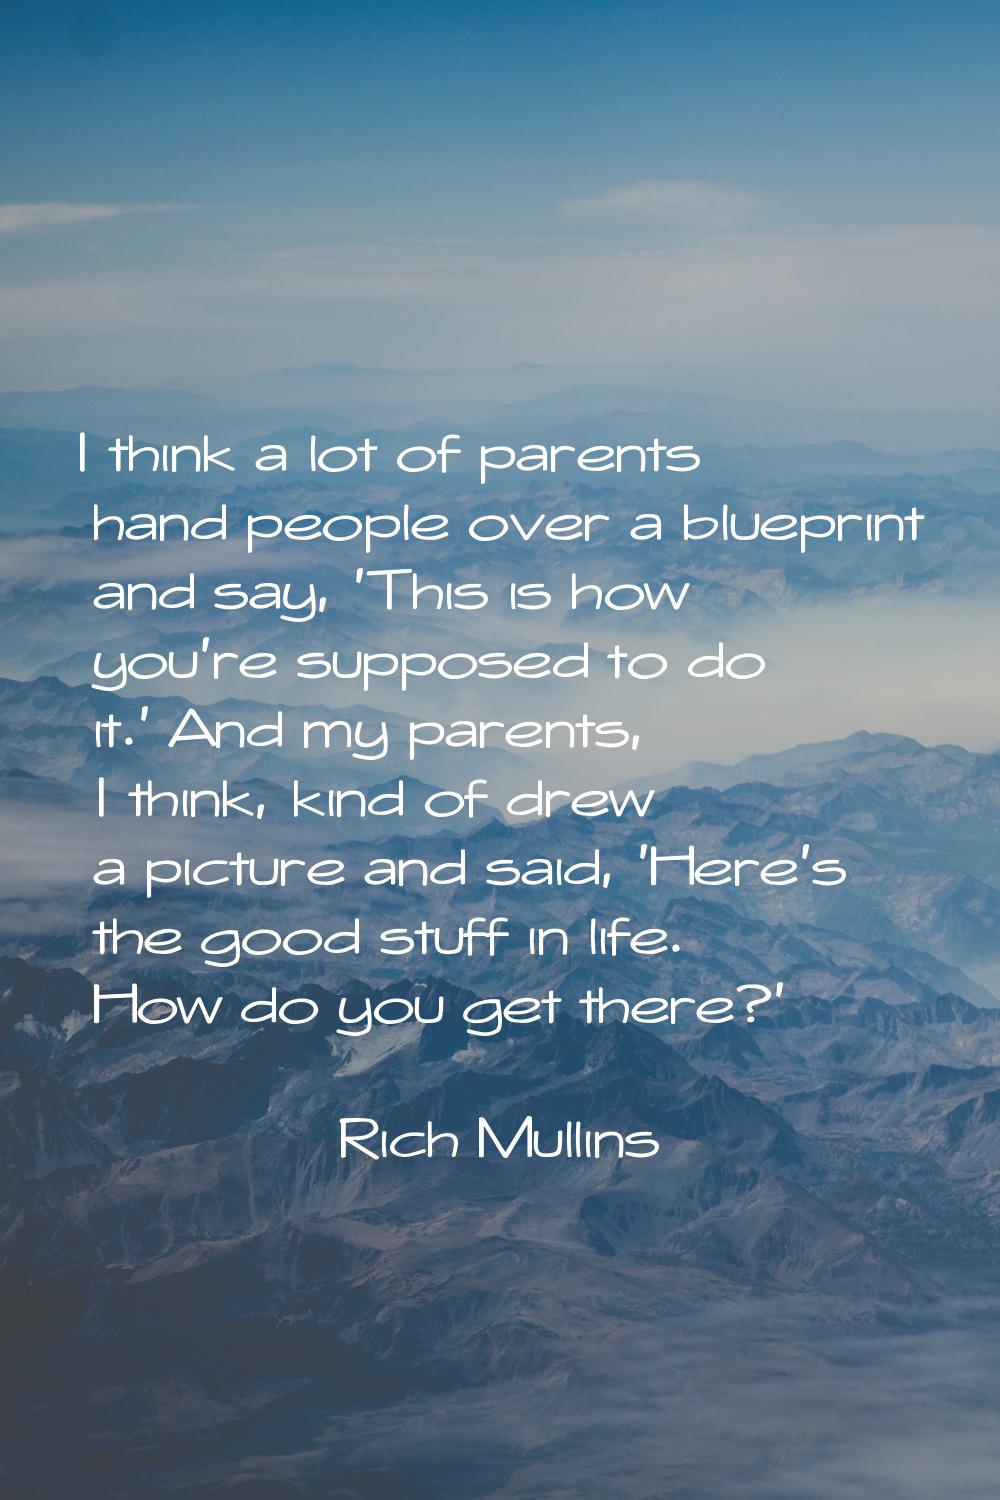 I think a lot of parents hand people over a blueprint and say, 'This is how you're supposed to do i